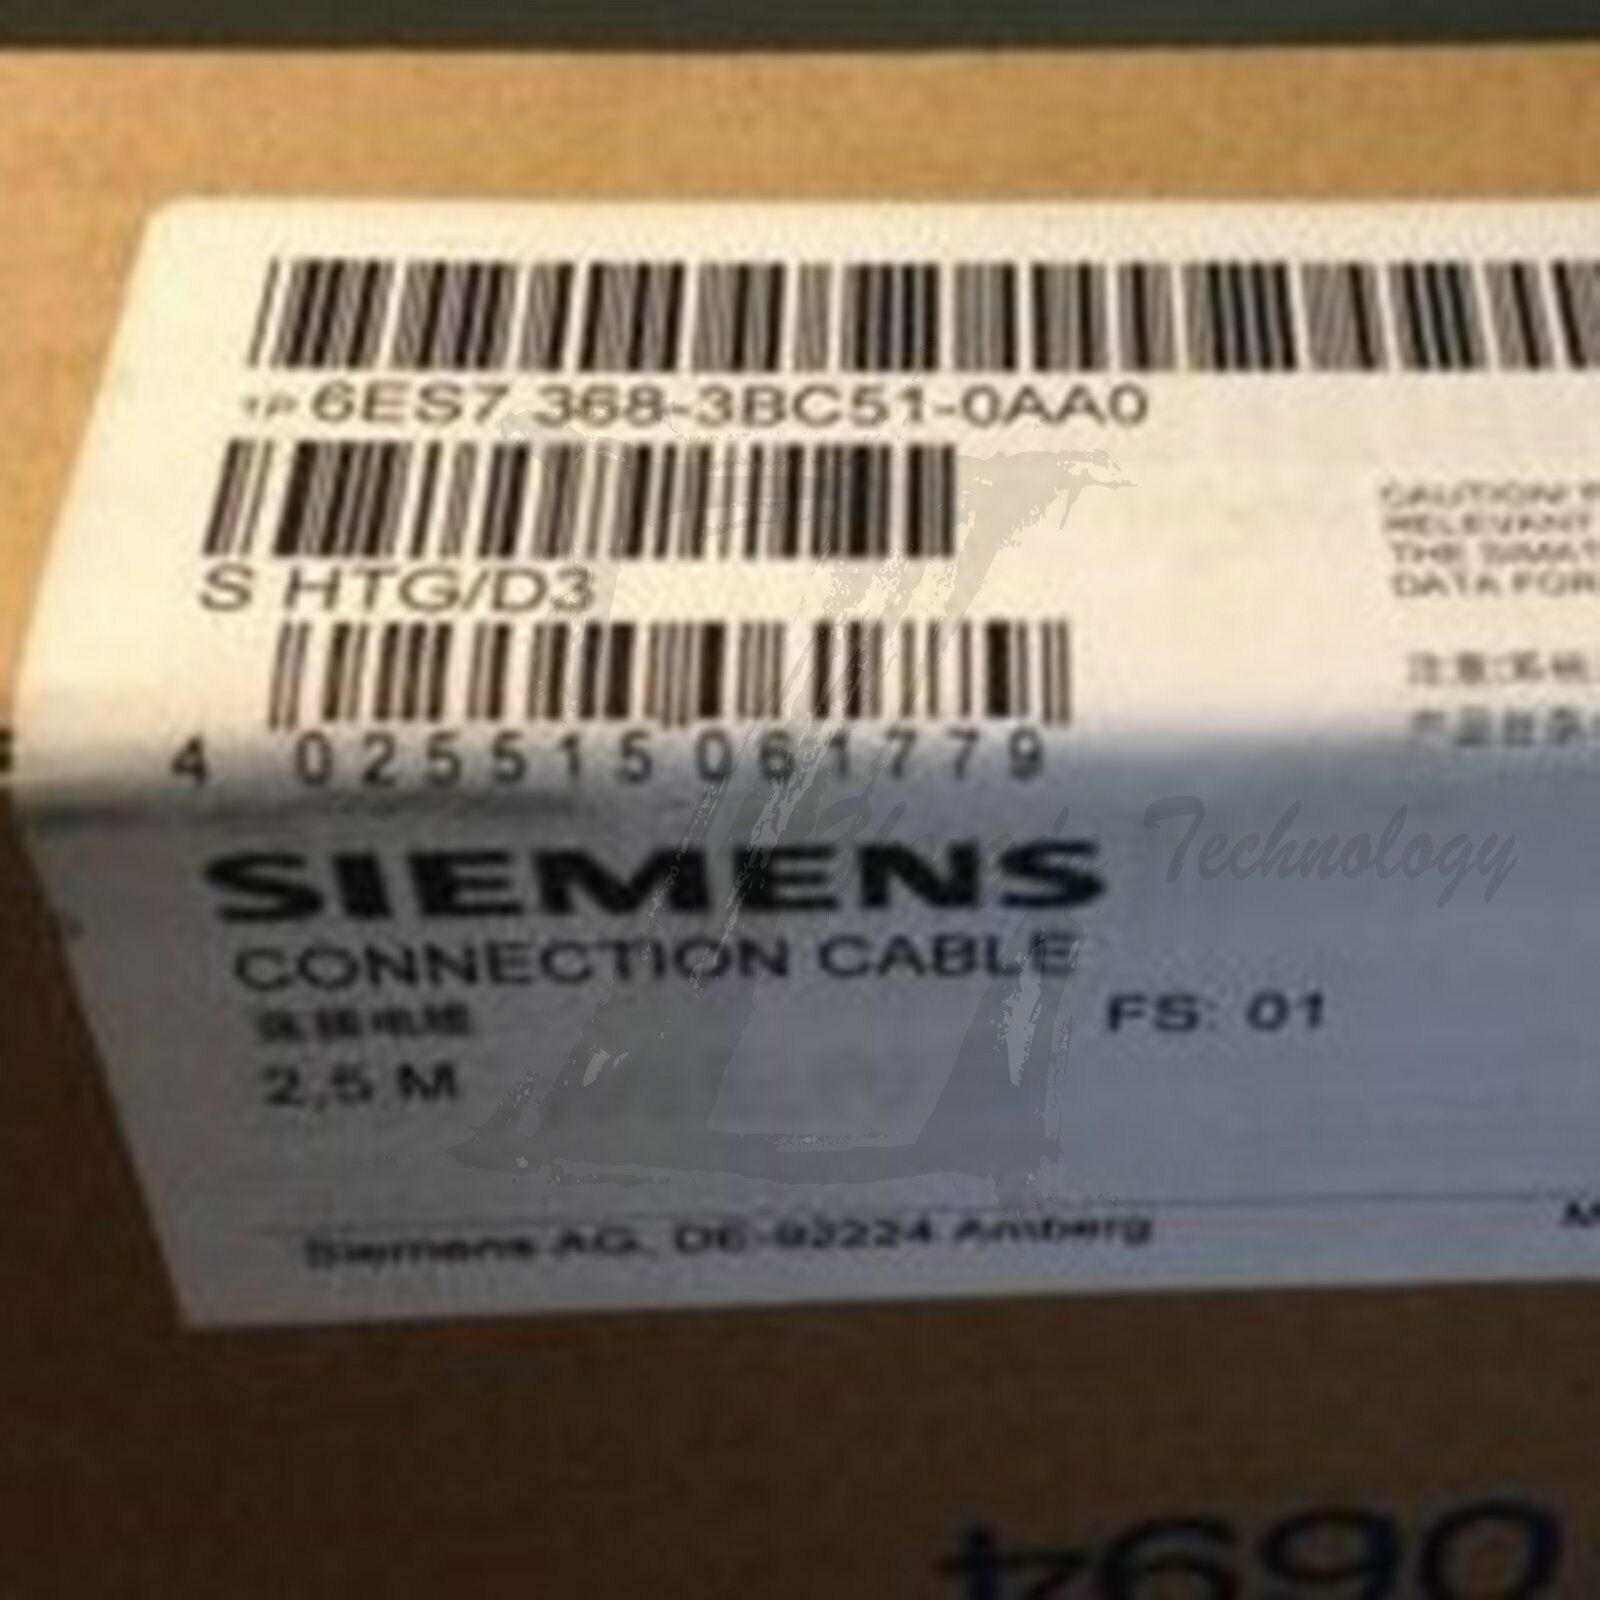 New Siemens S7-300 connecting cable 6ES7 368-3BC51-0AA0